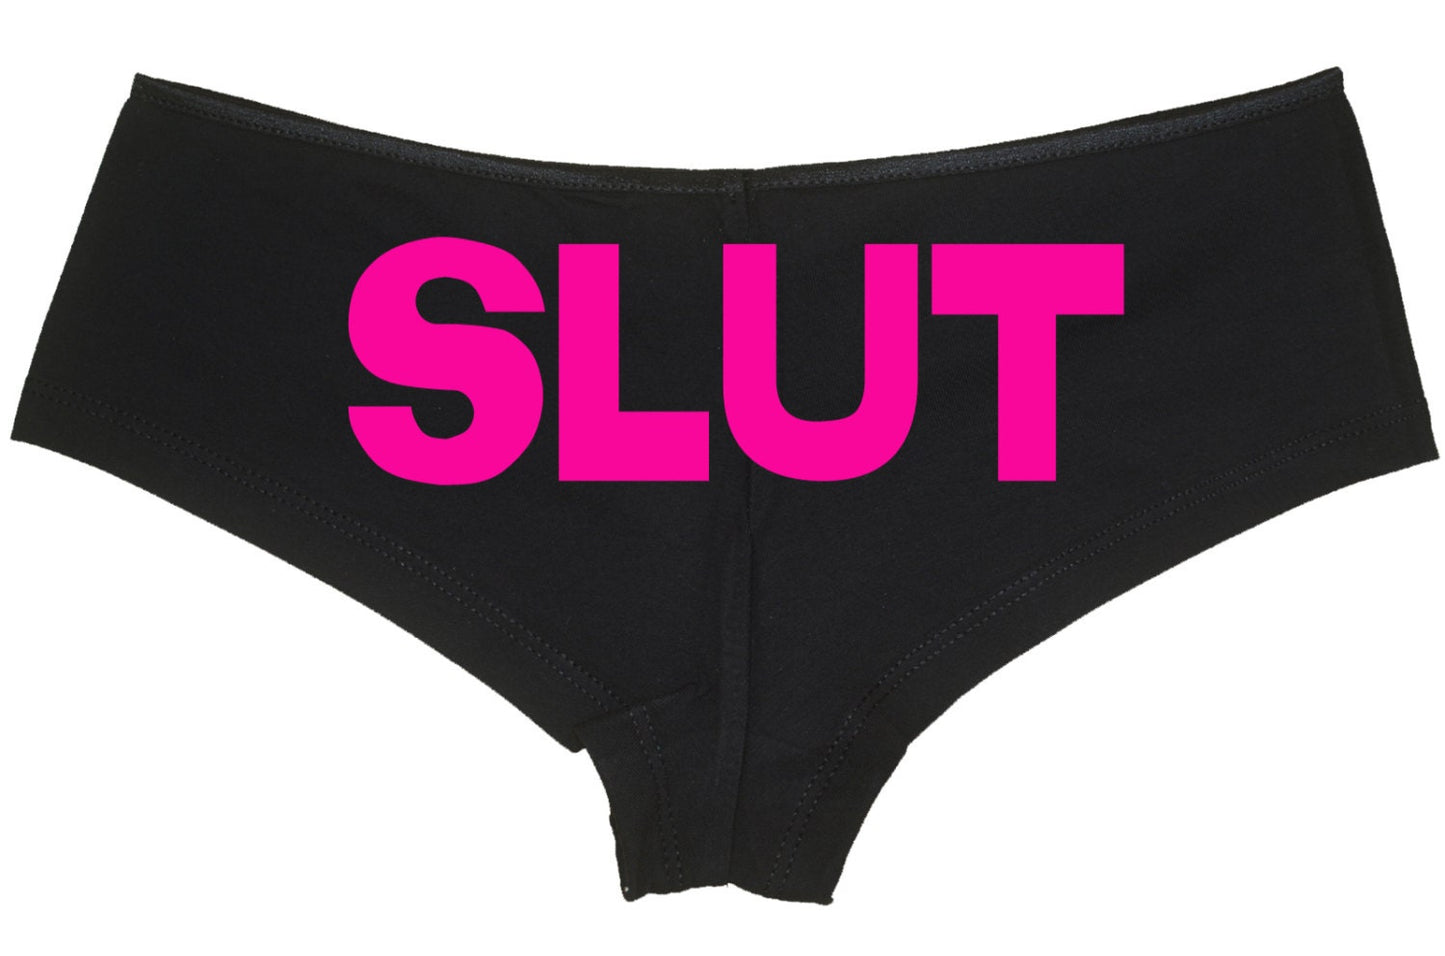 SLUT show your slutty side hen party bachelorette boy short panty panties boyshort sexy funny party rude bdsm ddlg cgl owned shared hotwife